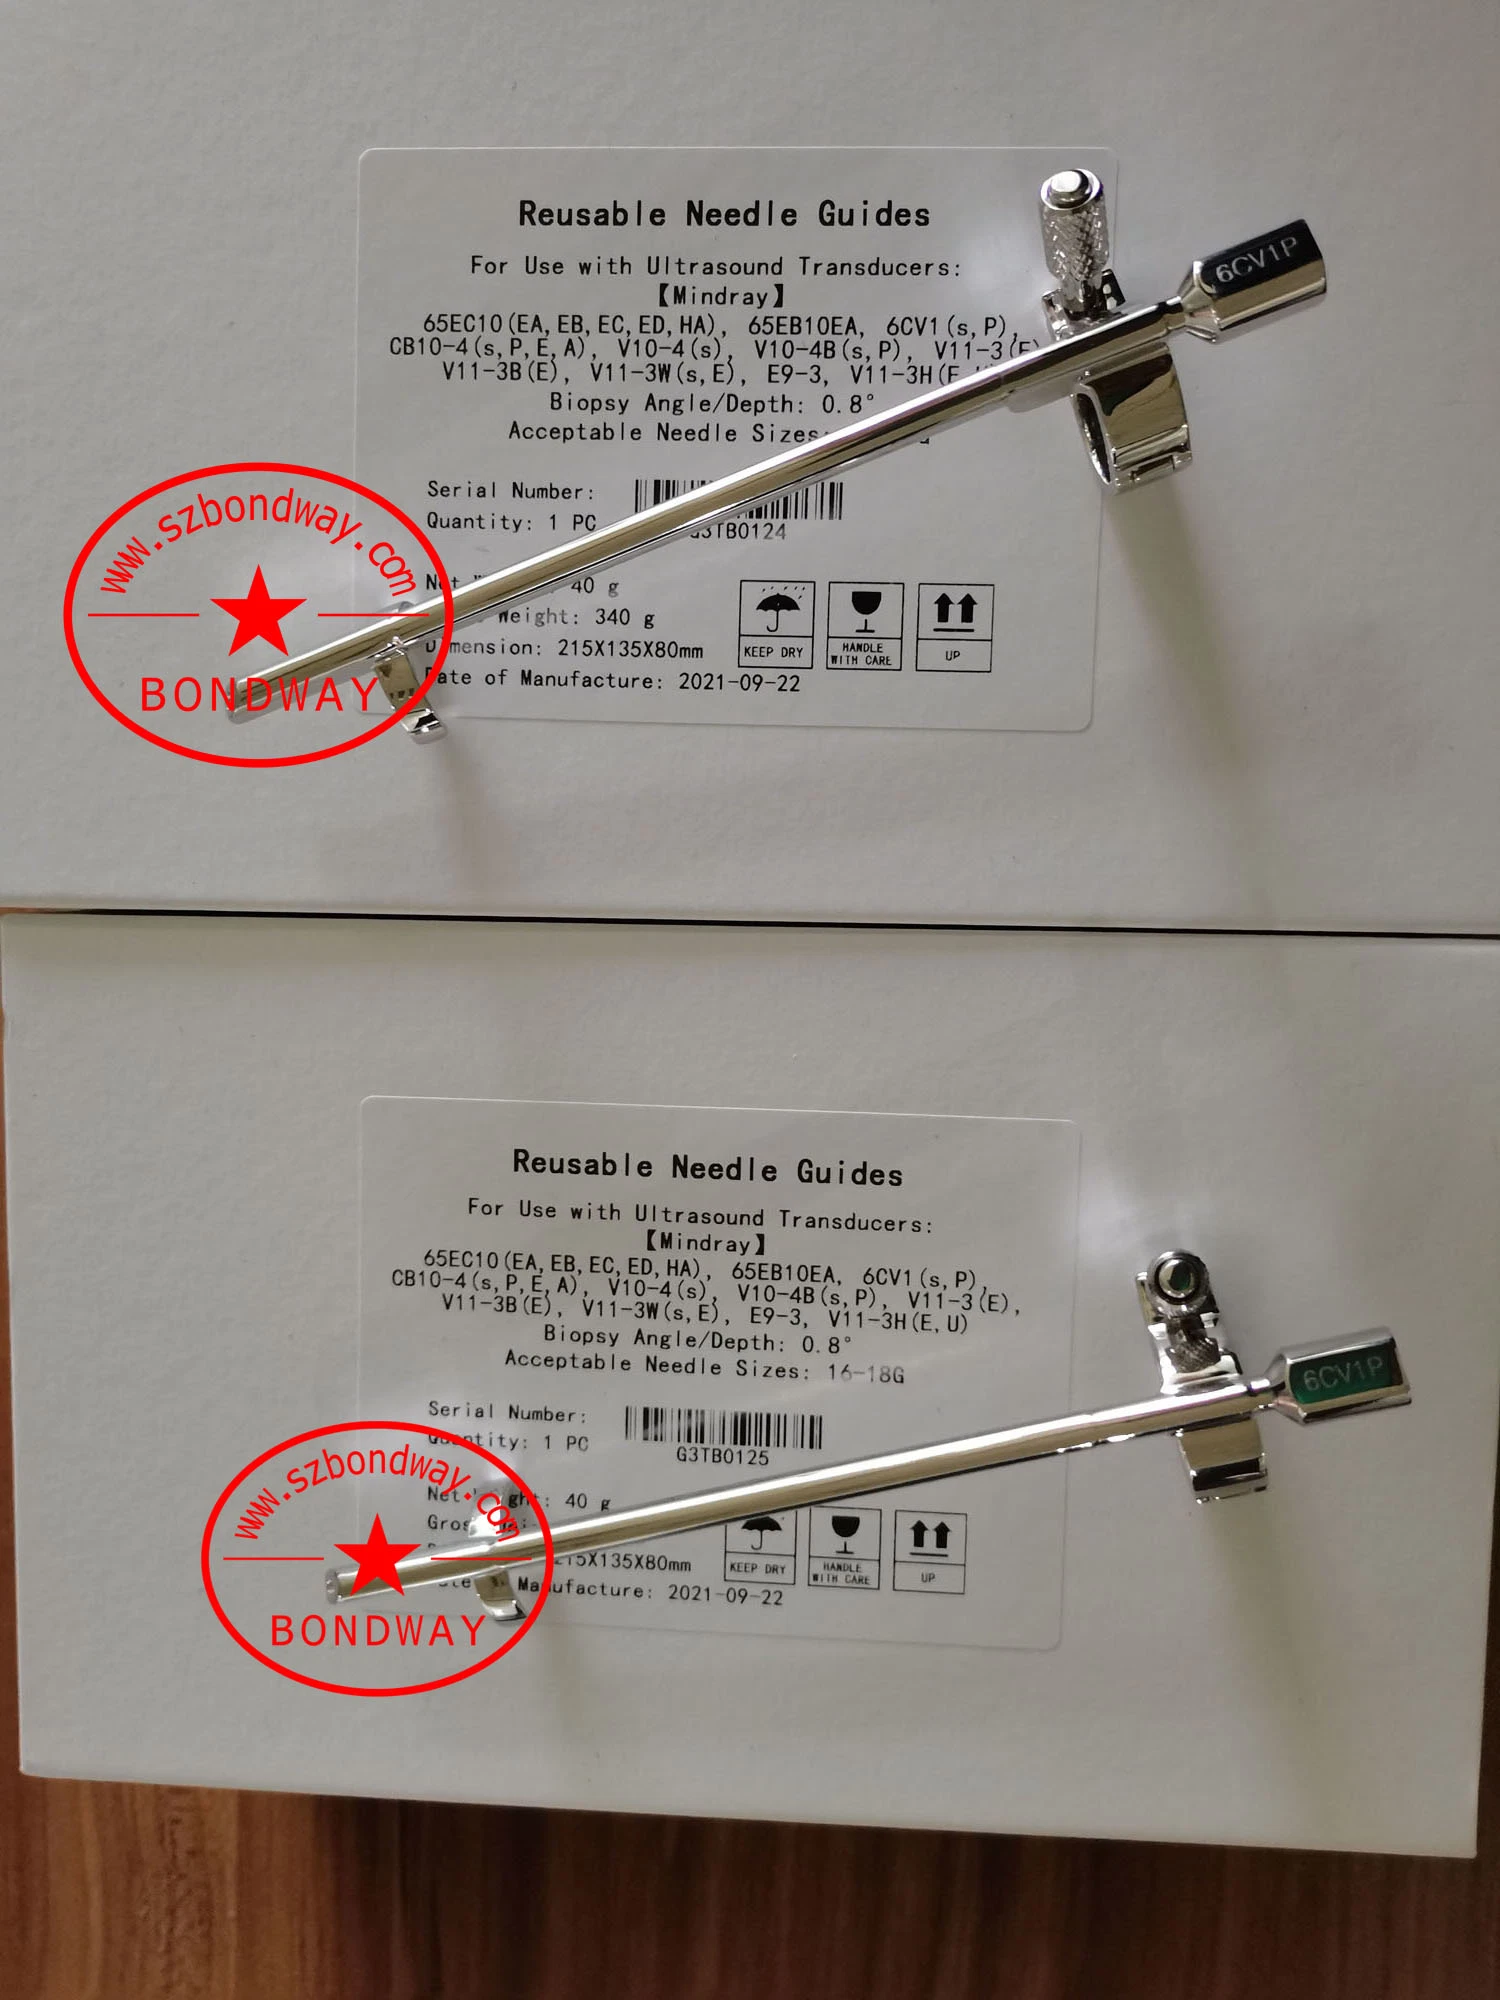 Biopsy Needle Bracket, Stainless Steel Biopsy Needle Guide for Use with Canon Toshiba 3D/4D Endocavity Transvaginal Transducer Pvt-681mv